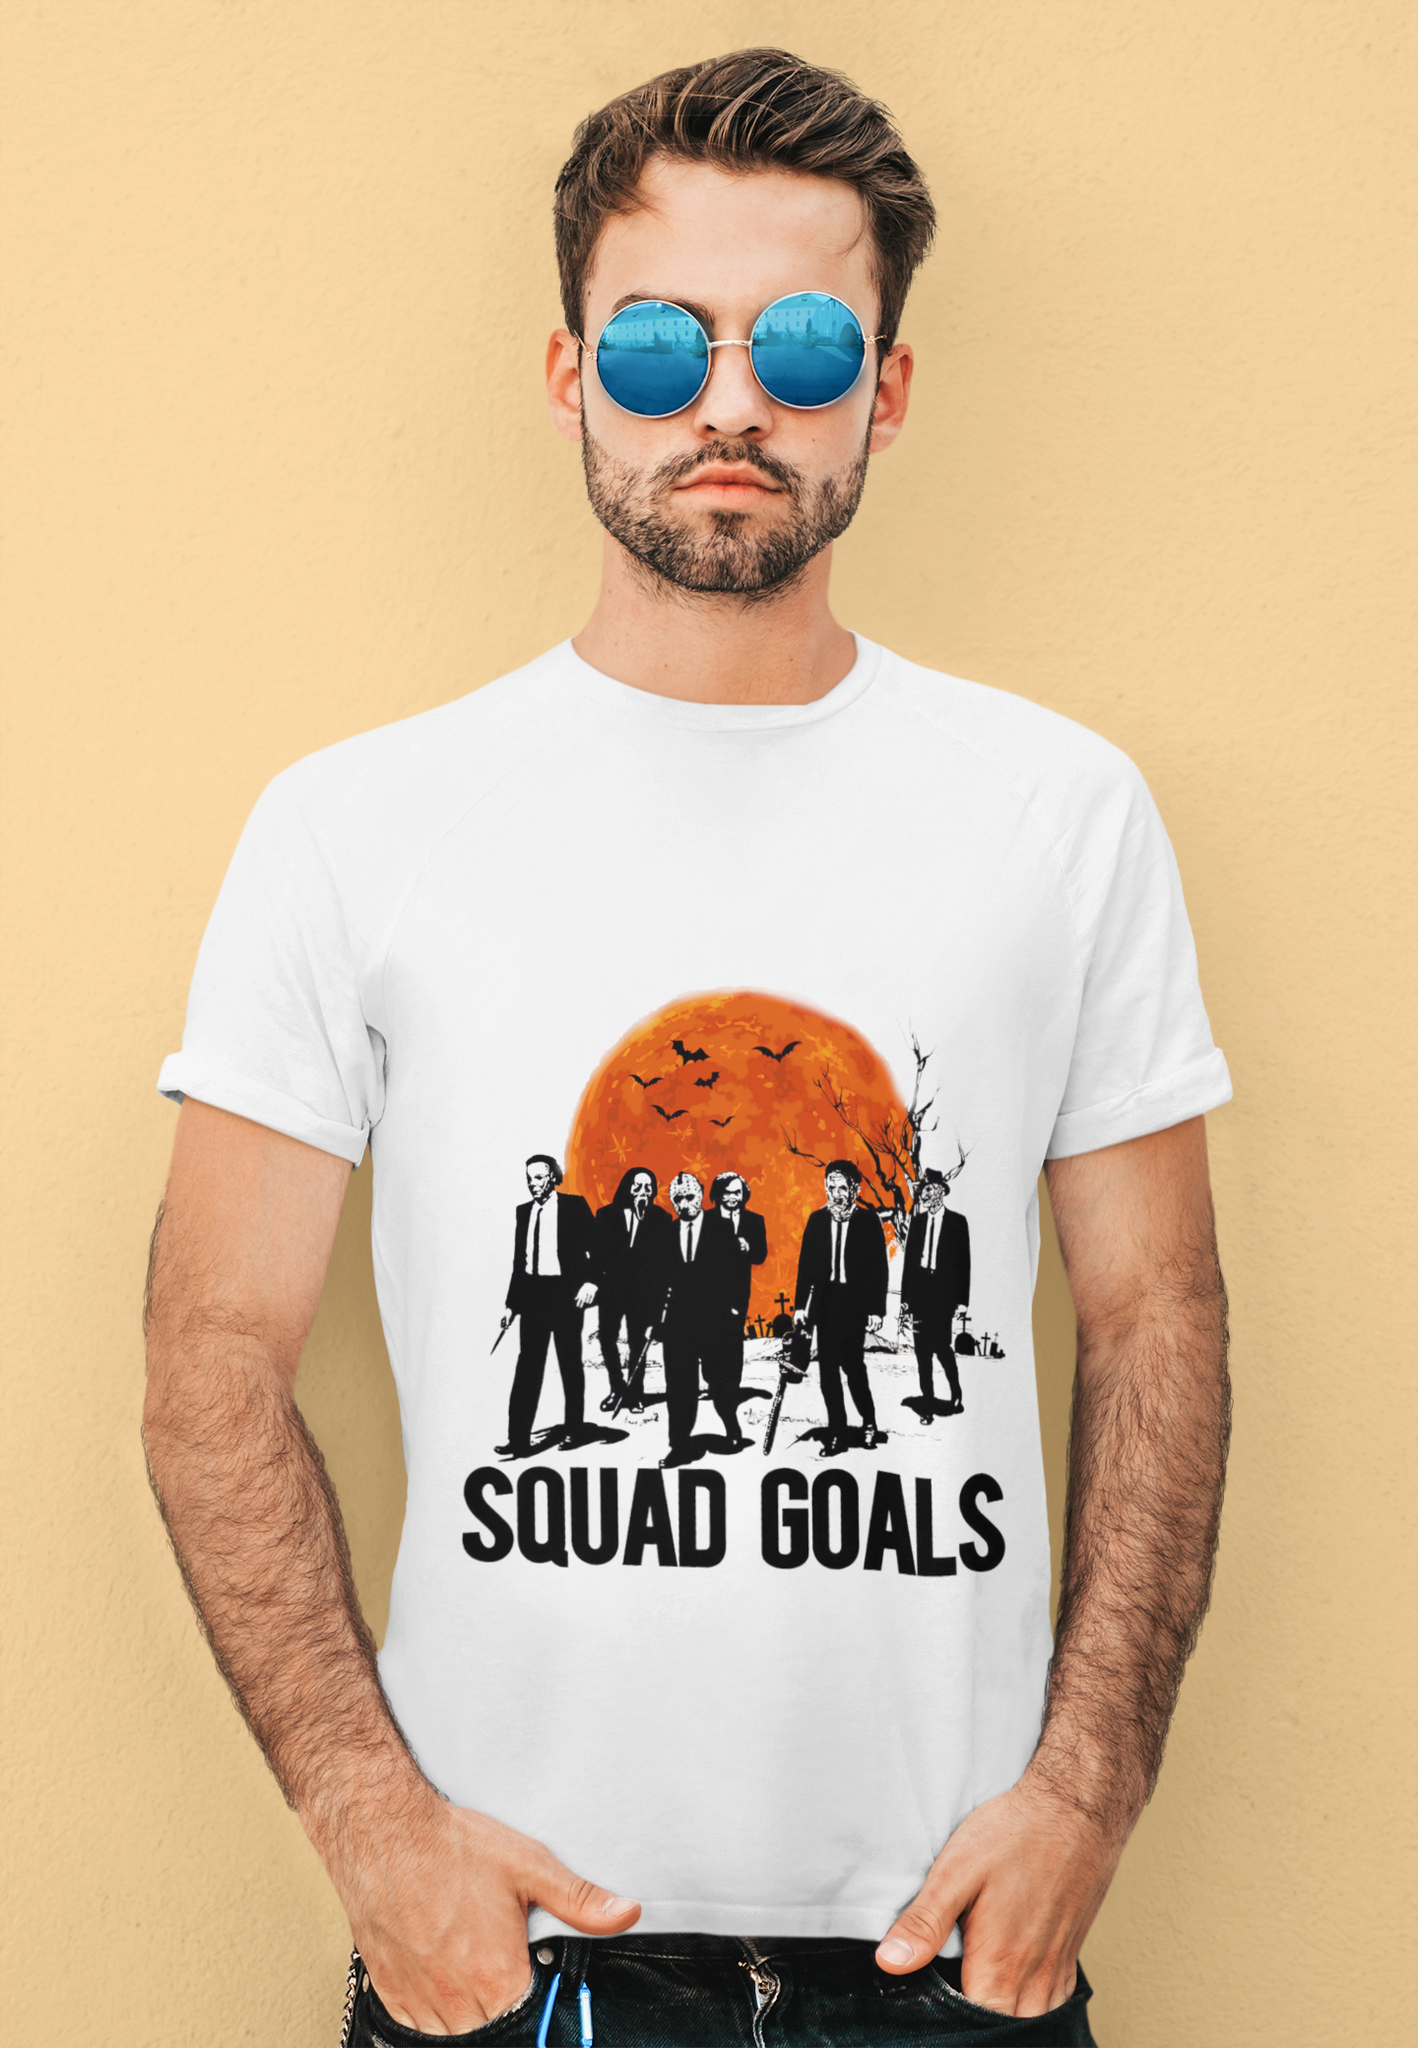 Horror Movie Characters Tshirt, Chucky Michael Myers Shirt, Squad Goals T Shirt, Halloween Gifts